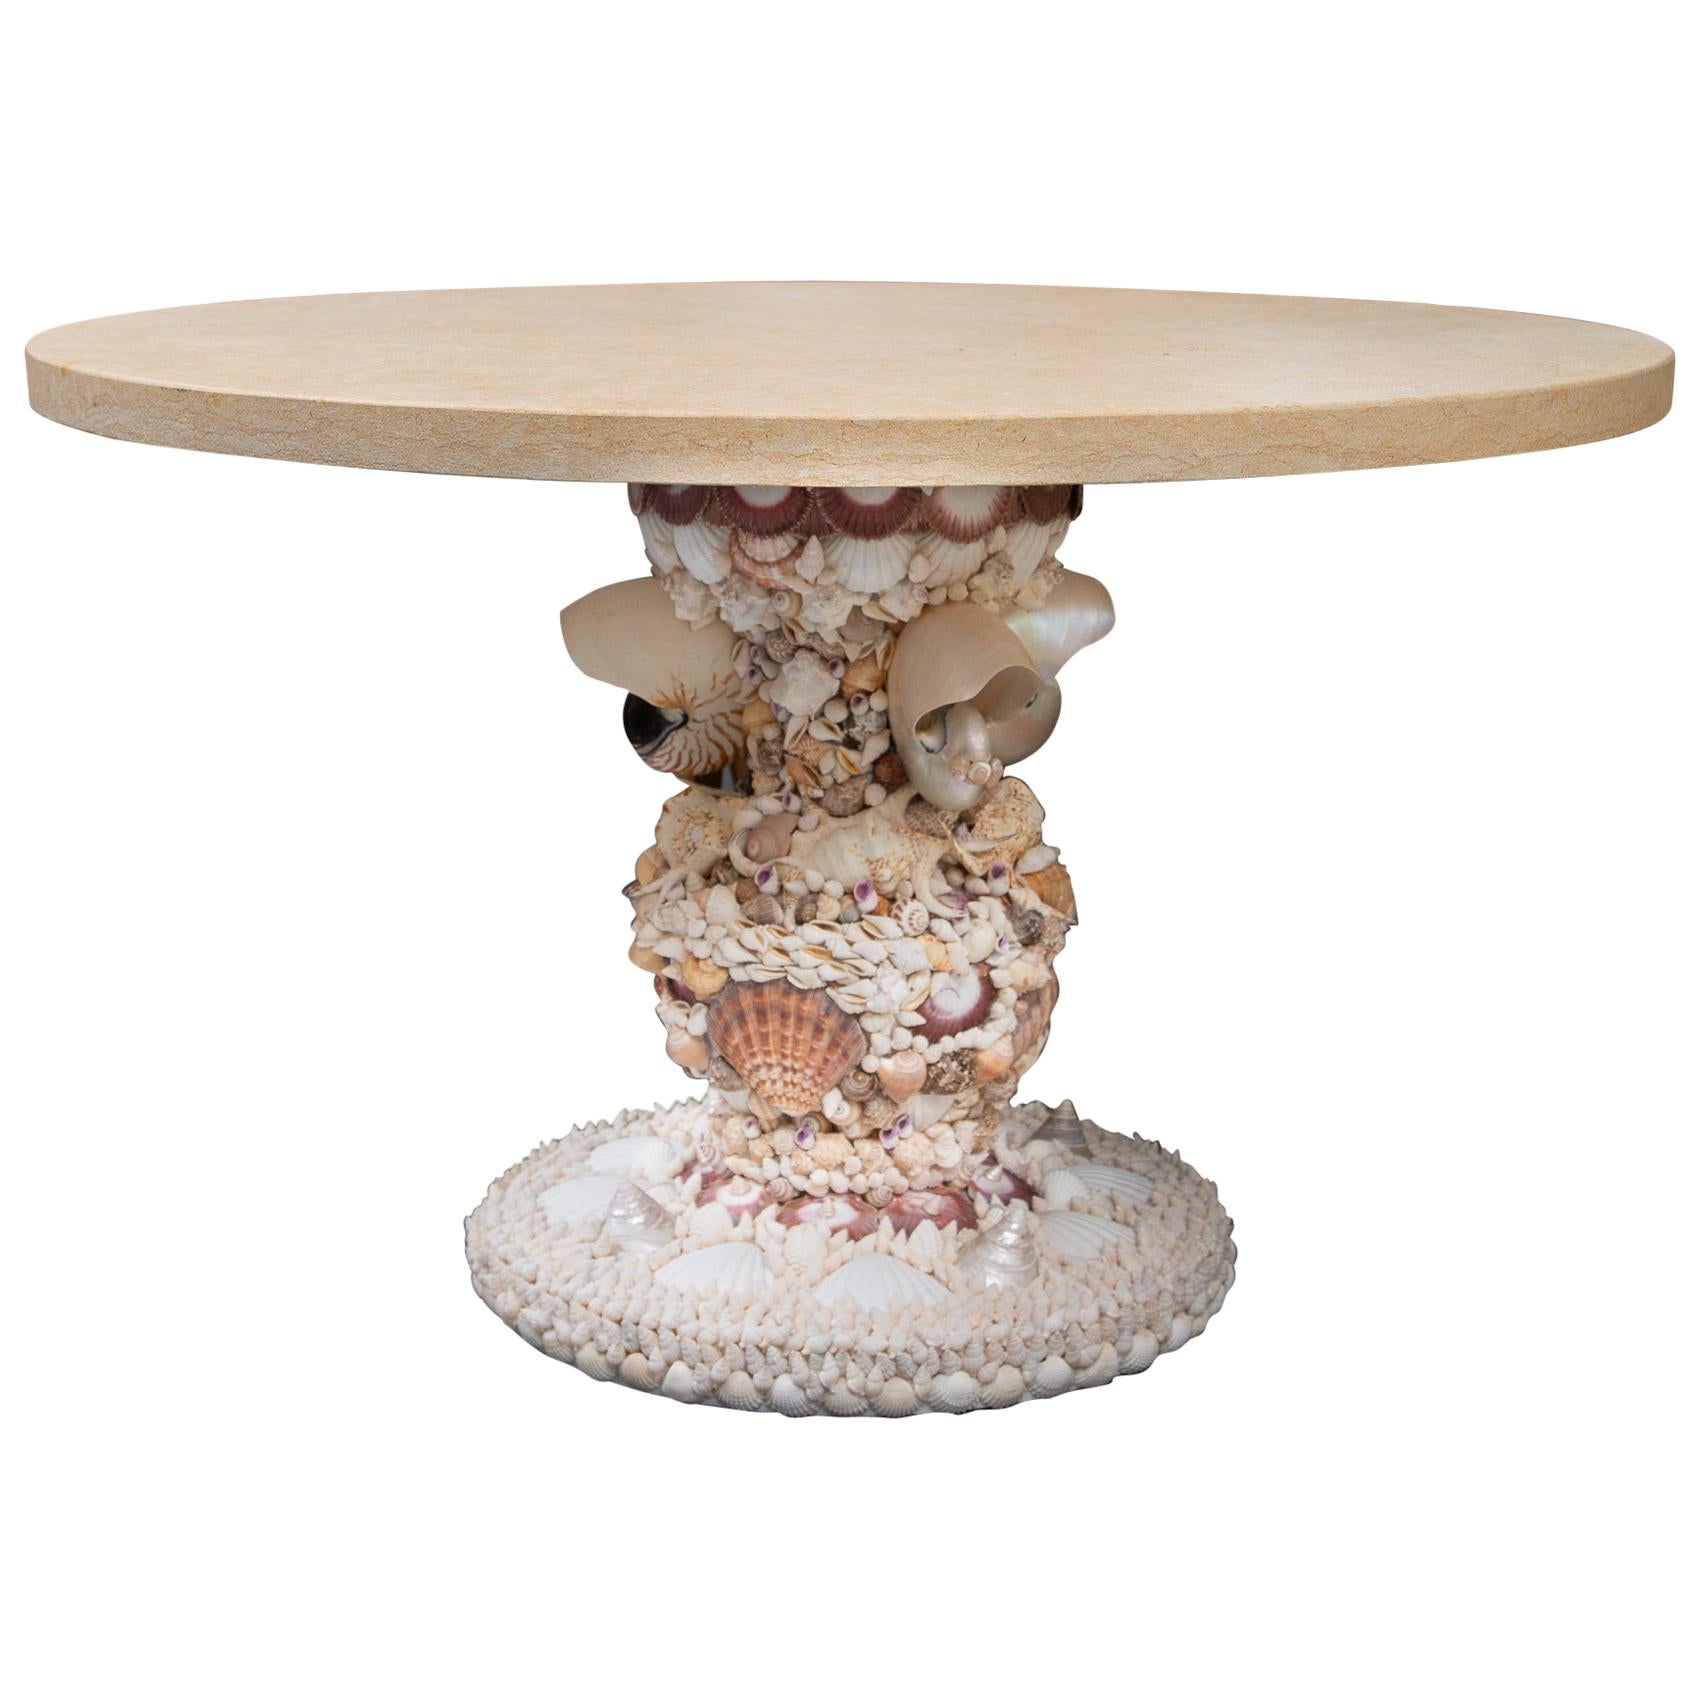 Shell Encrusted Center Table with Limestone Top